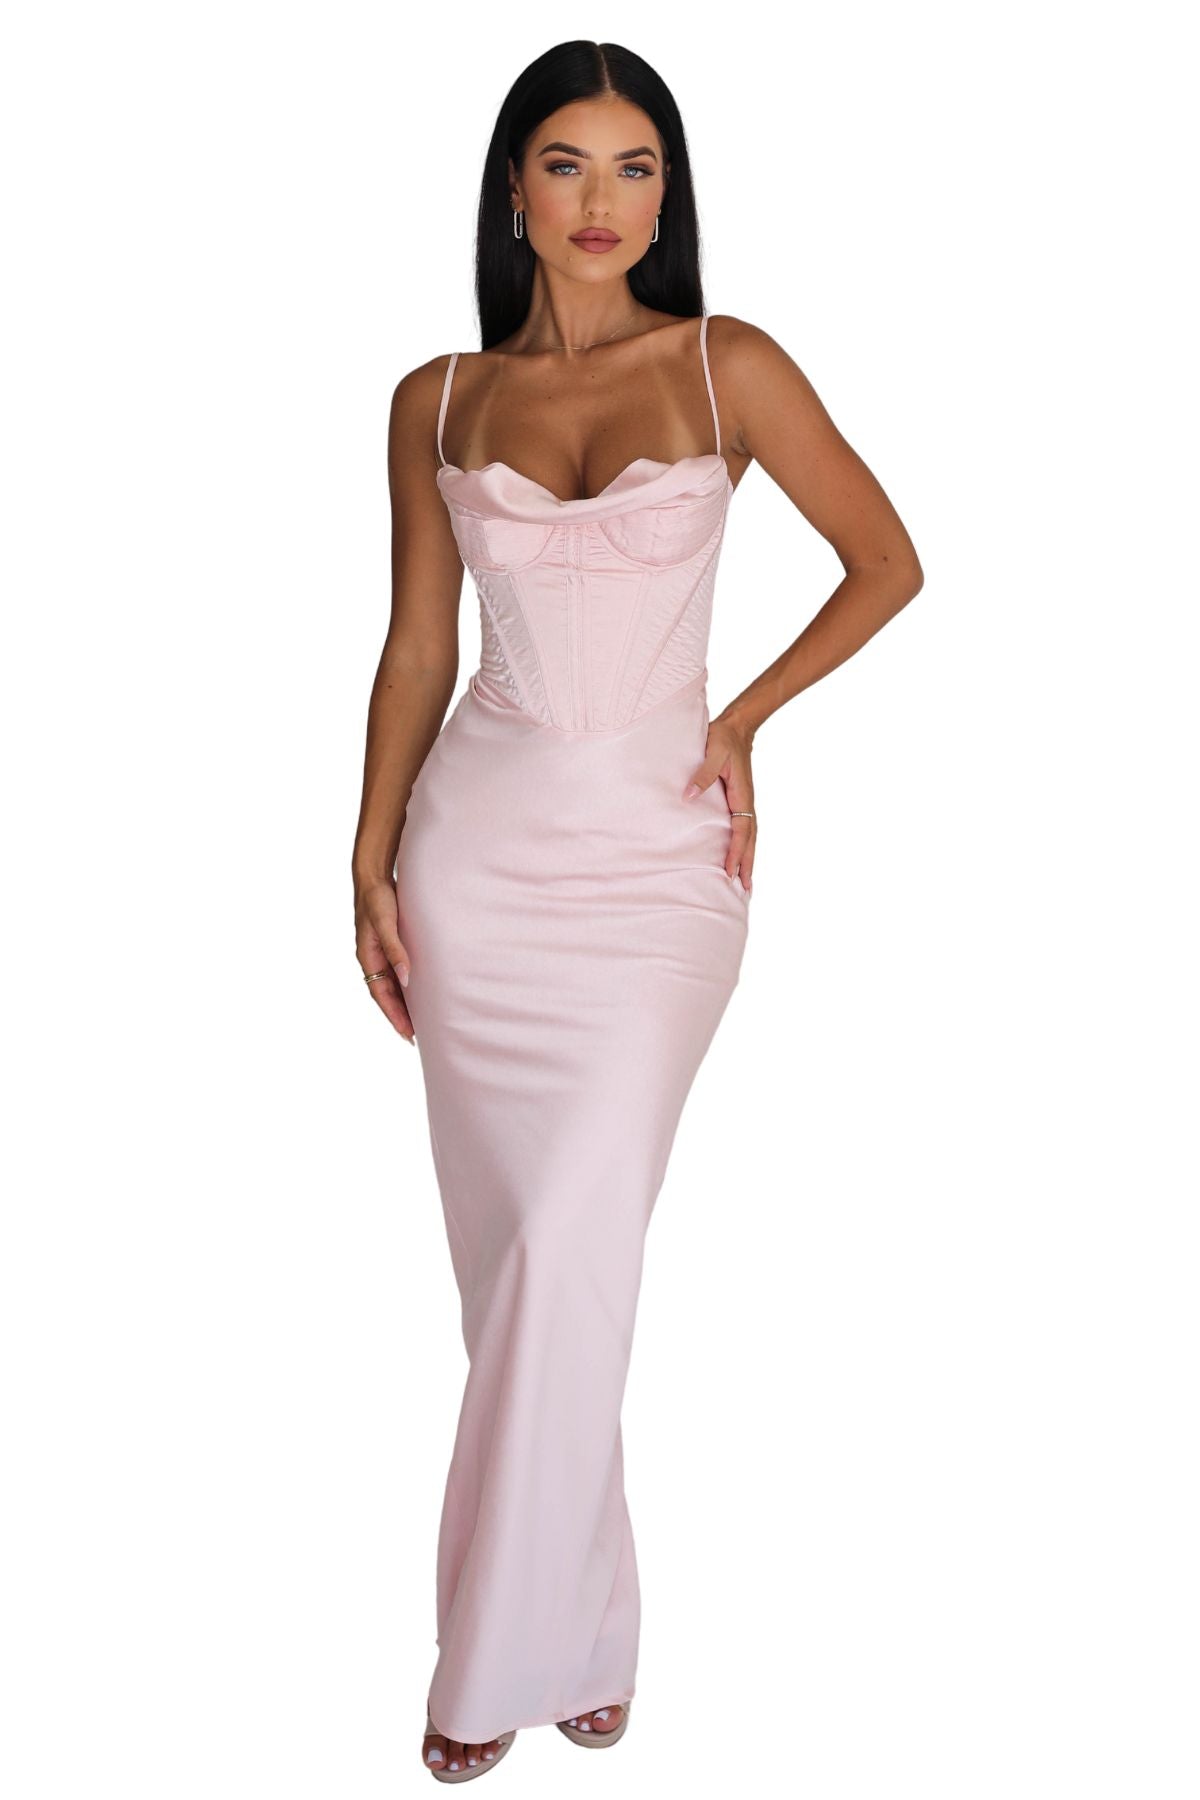 HOUSE OF CB Charmaine Corset Gown (Blush Pink) - RRP $389